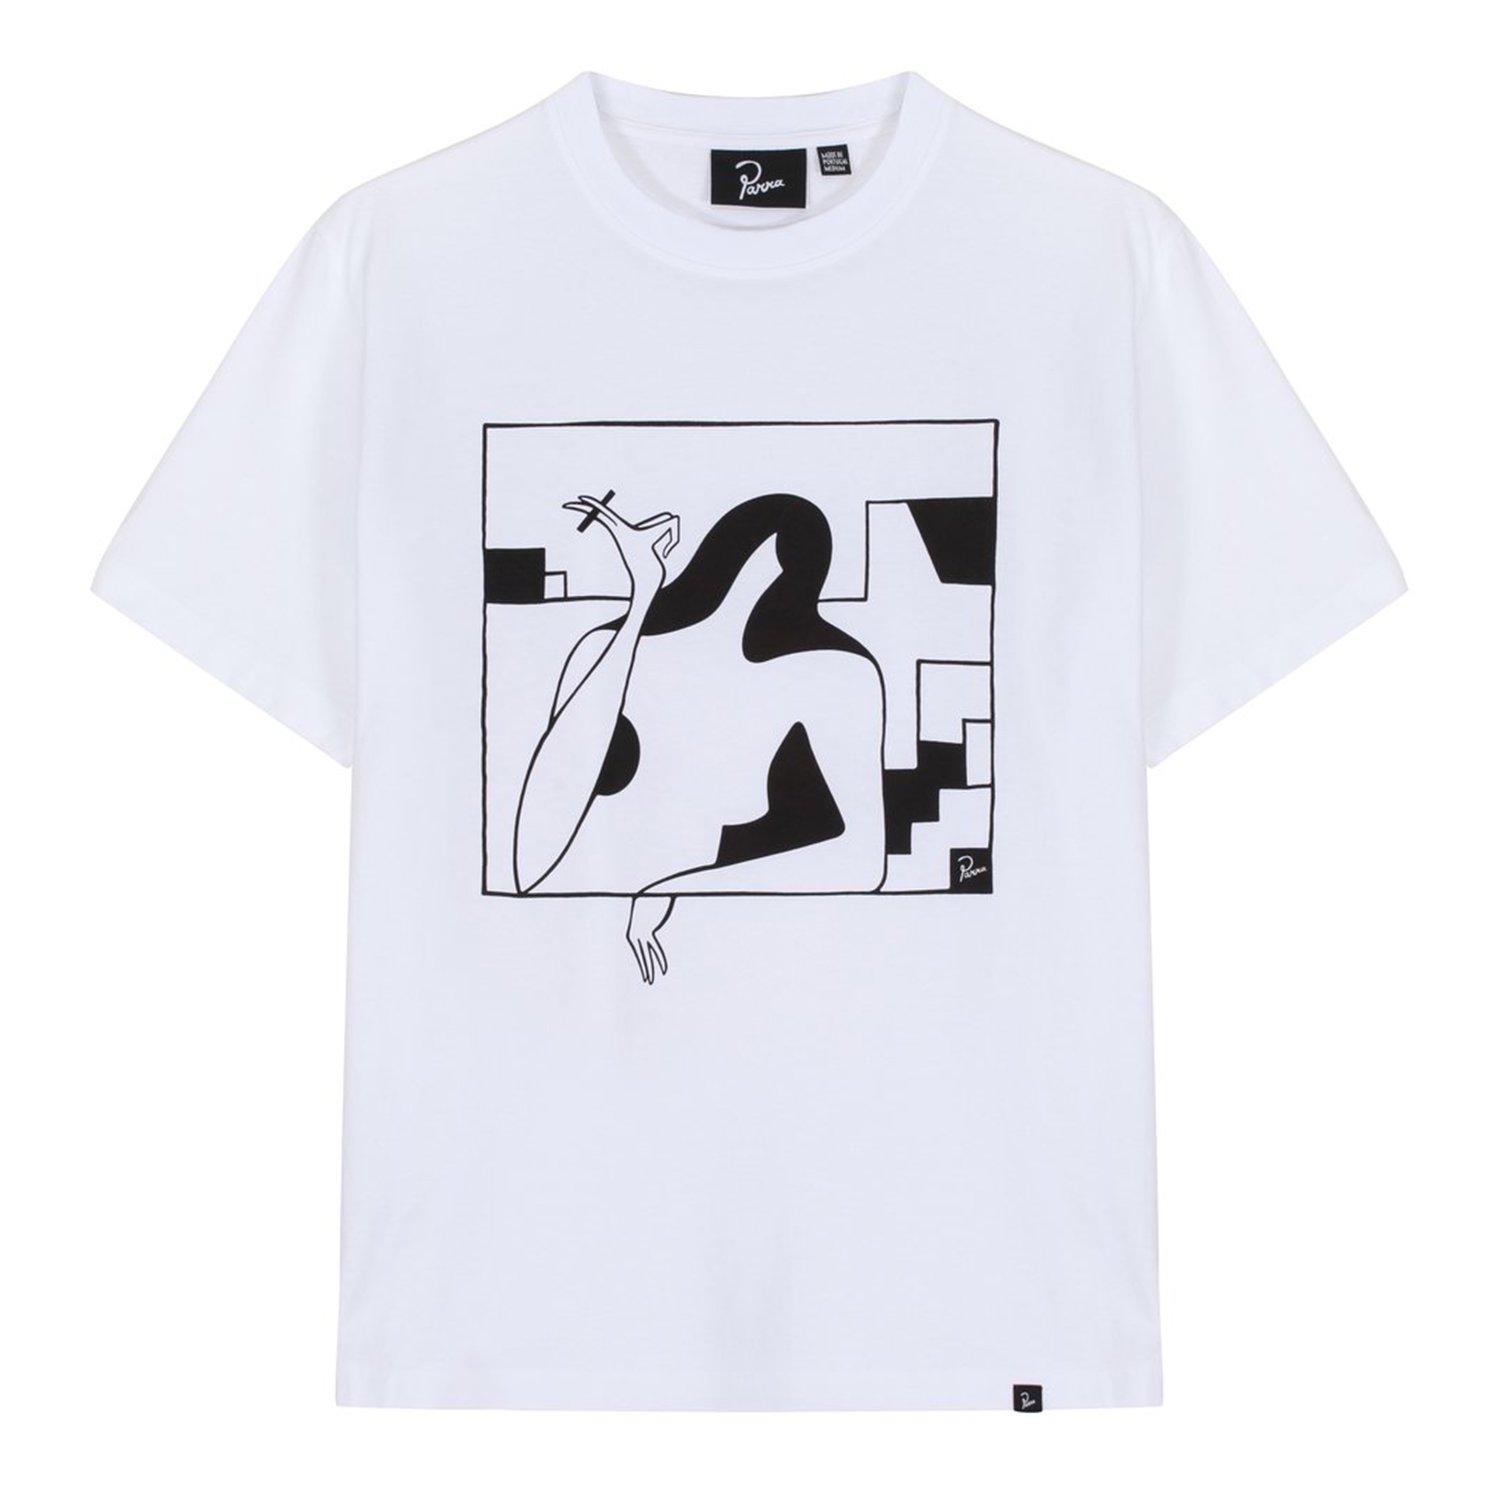 <img class='new_mark_img1' src='https://img.shop-pro.jp/img/new/icons8.gif' style='border:none;display:inline;margin:0px;padding:0px;width:auto;' />Parra ѥ / lockdown t-shirt